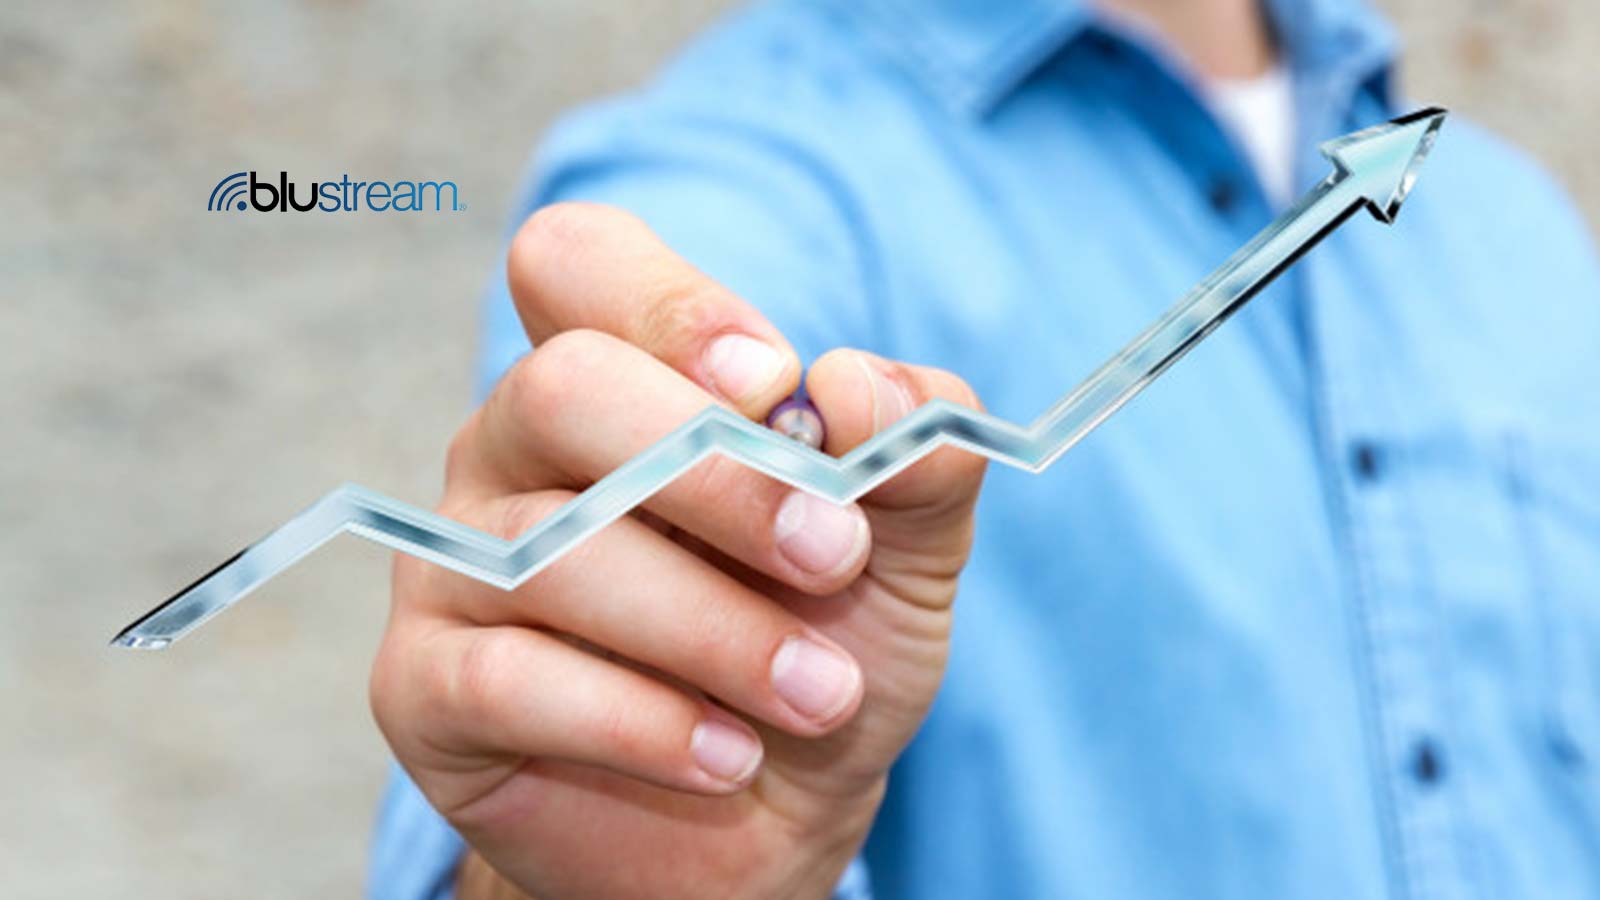 Blustream Experiences Explosive Growth, Solidifying the Need for After-Sale Product Experience